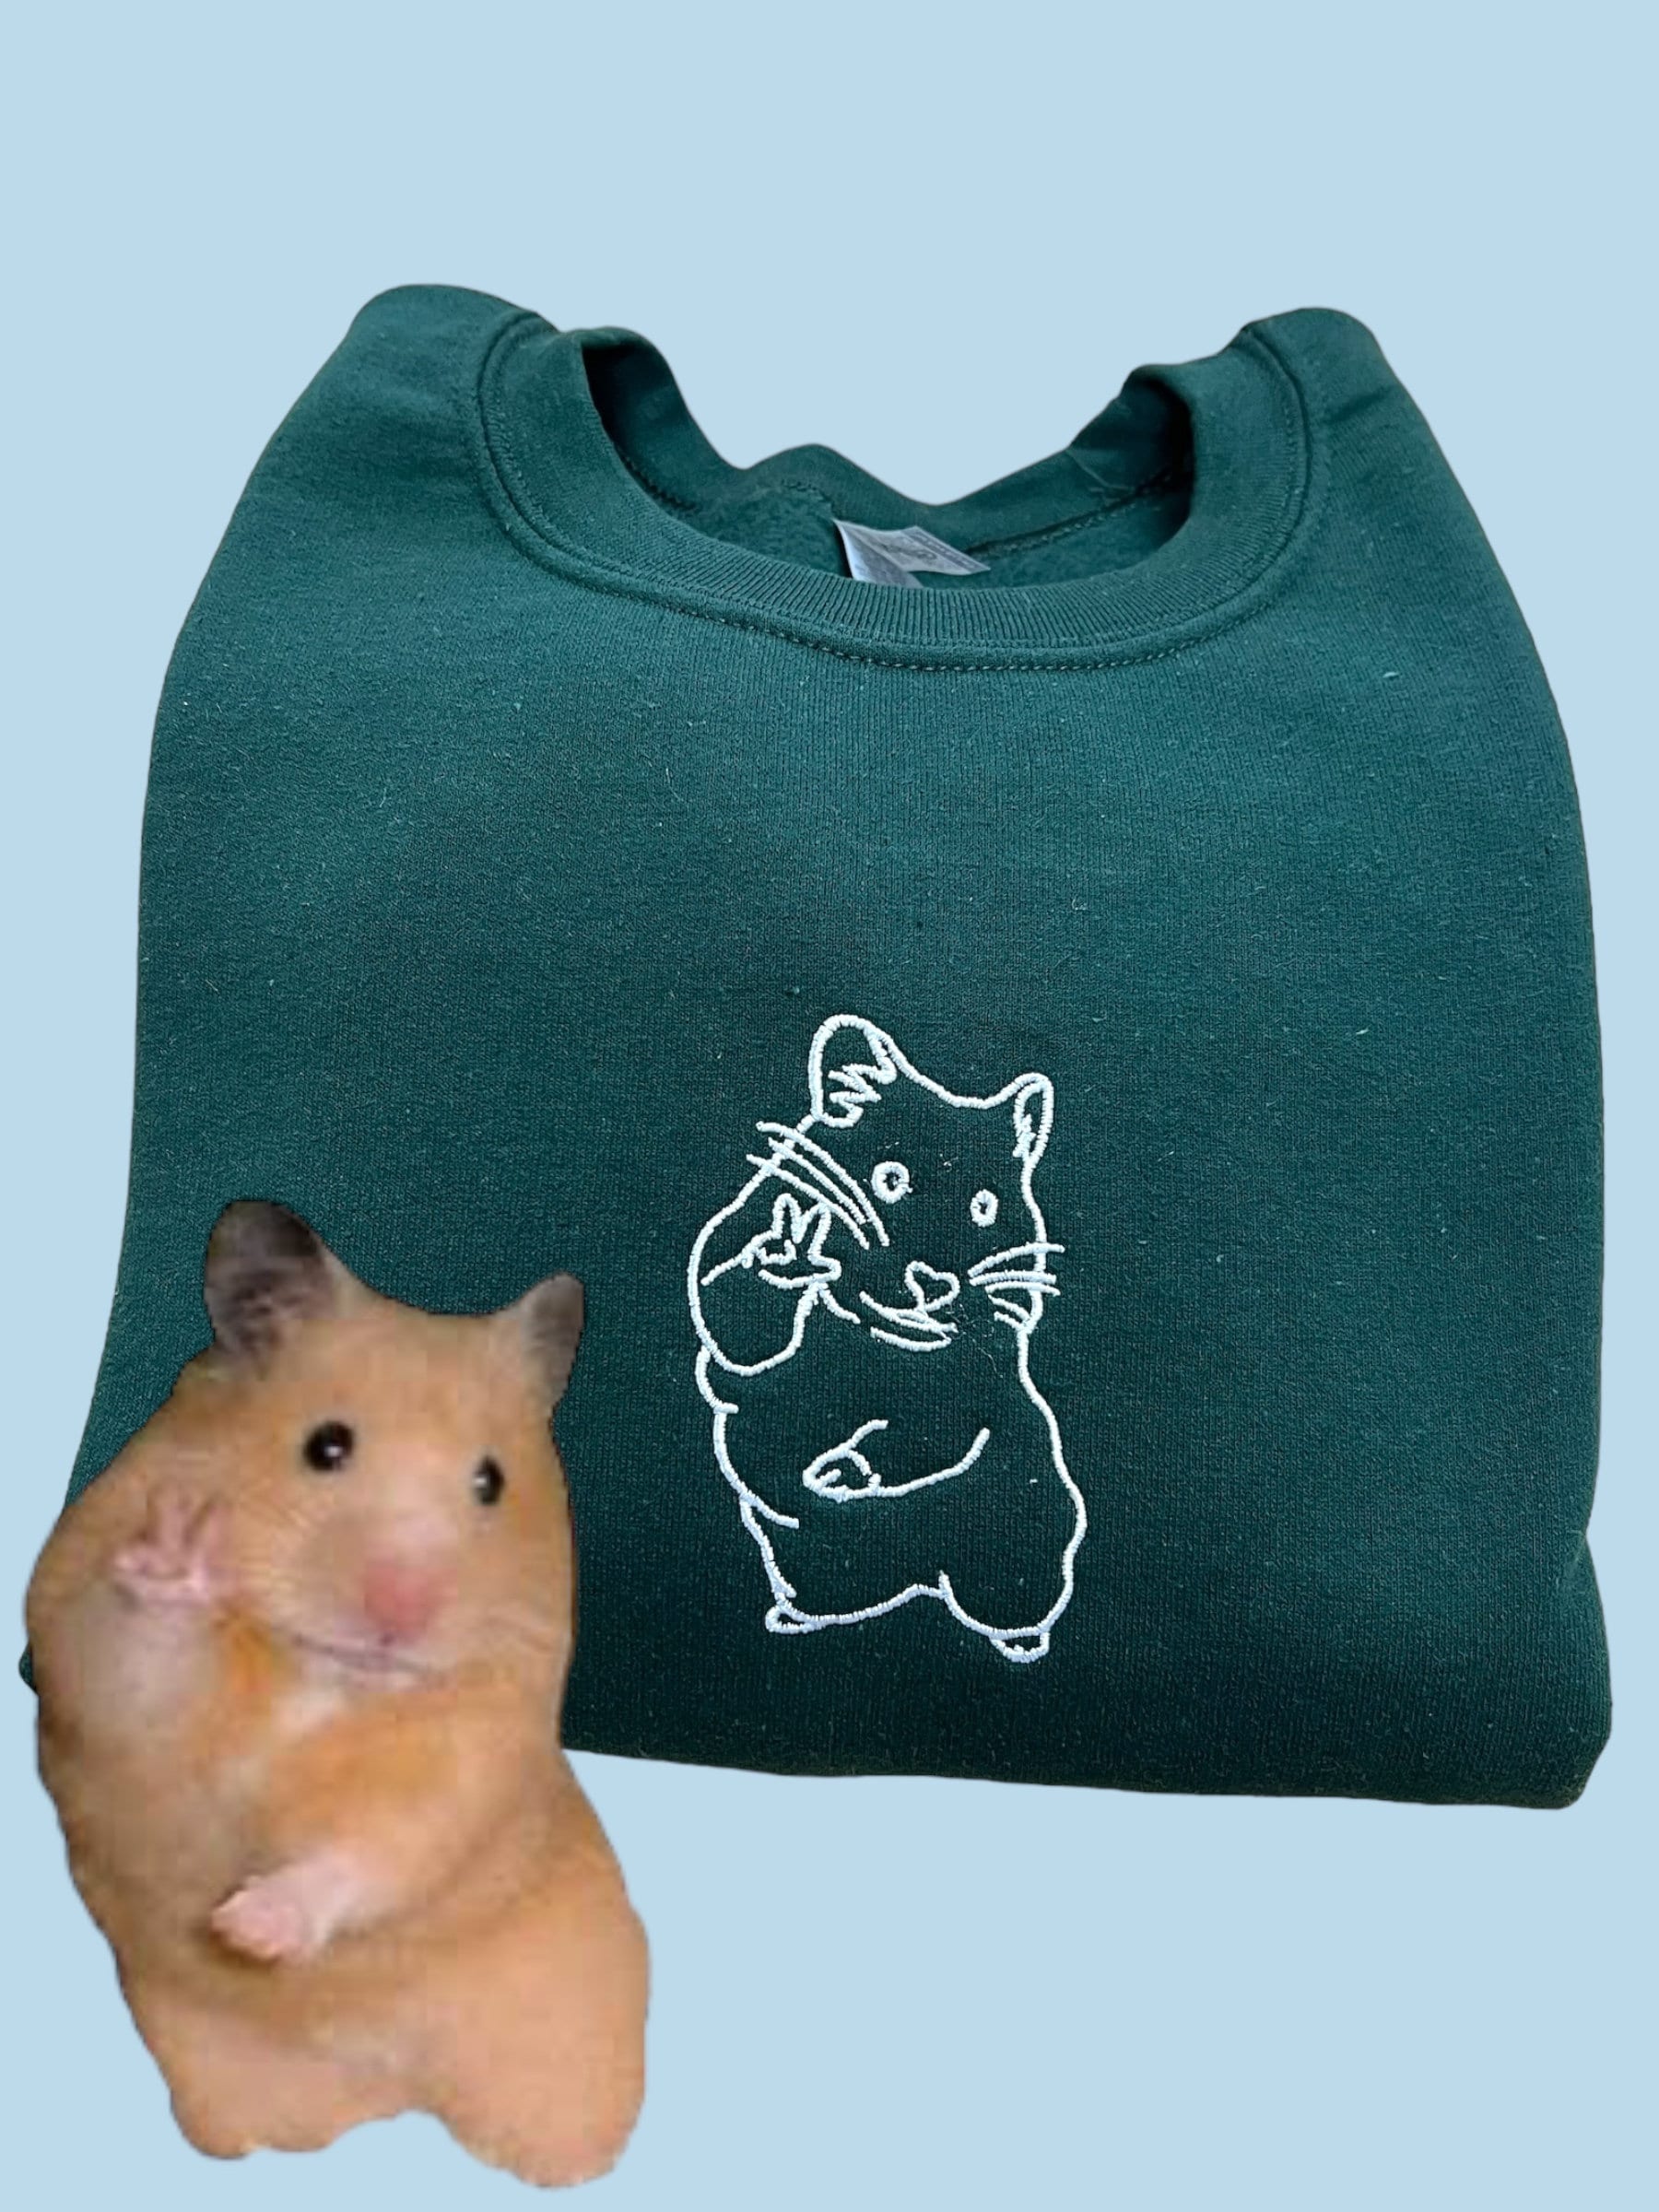 a hamster sitting next to a green bag